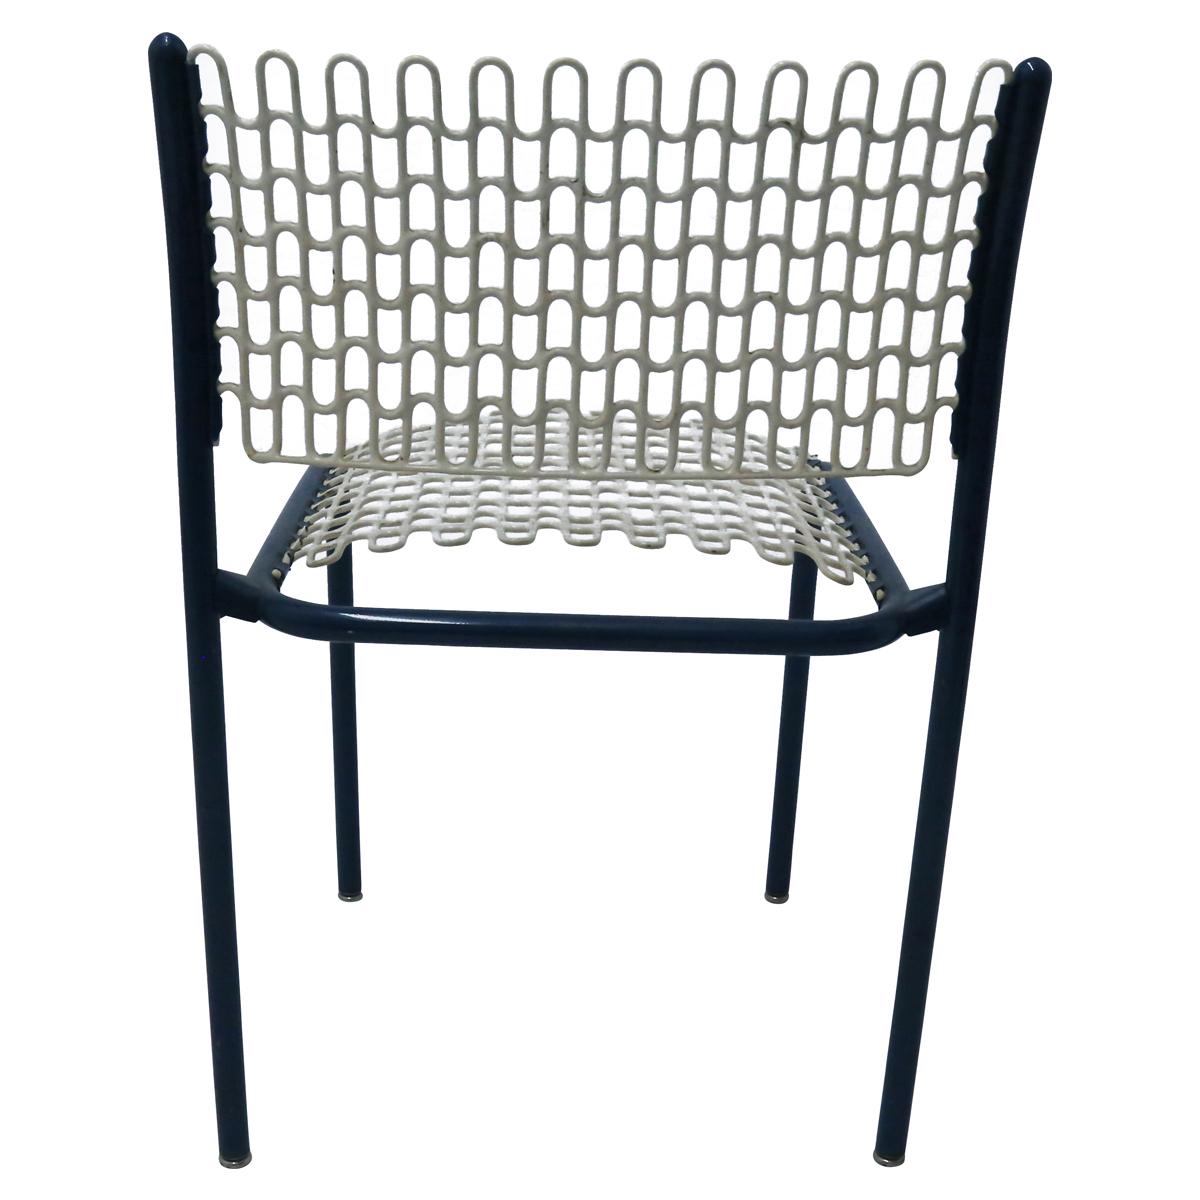 Mid-20th Century Set of Four Modernist Indoor/Outdoor Chairs with Mesh Seats and Backs For Sale